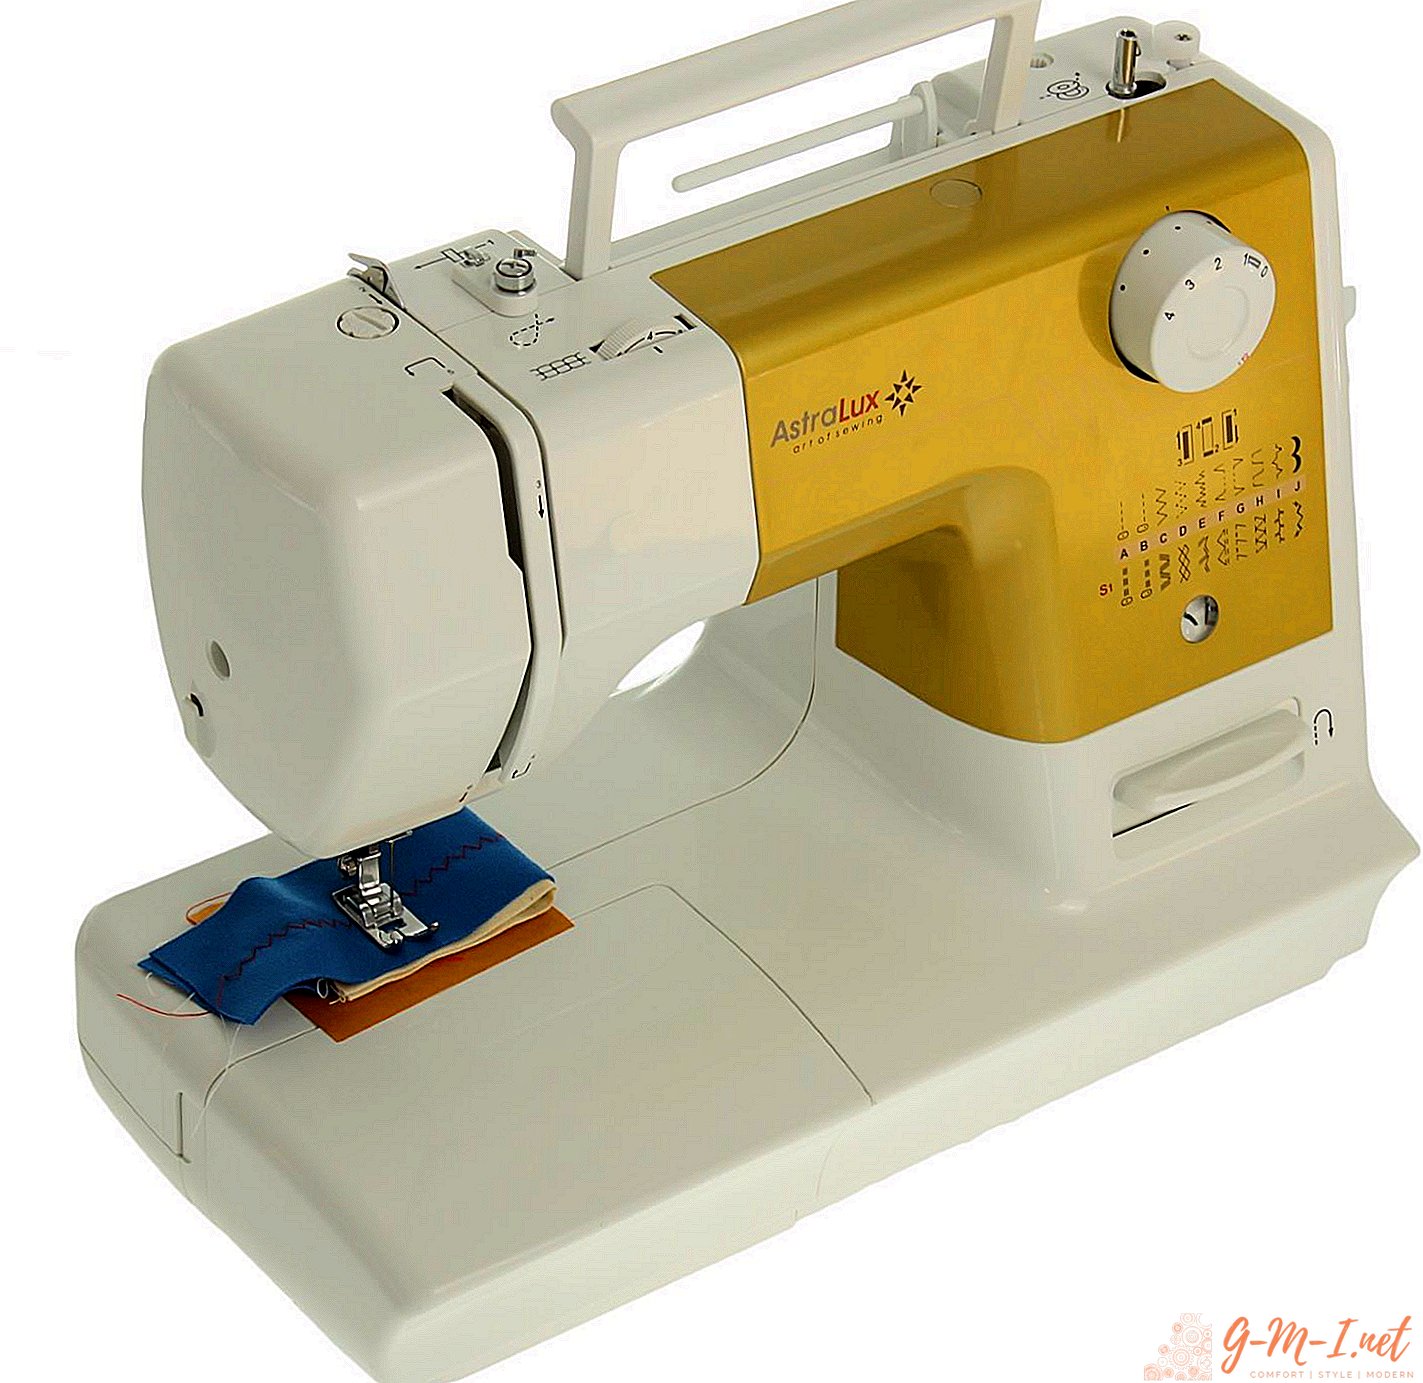 What is a semi-automatic buttonhole in a sewing machine